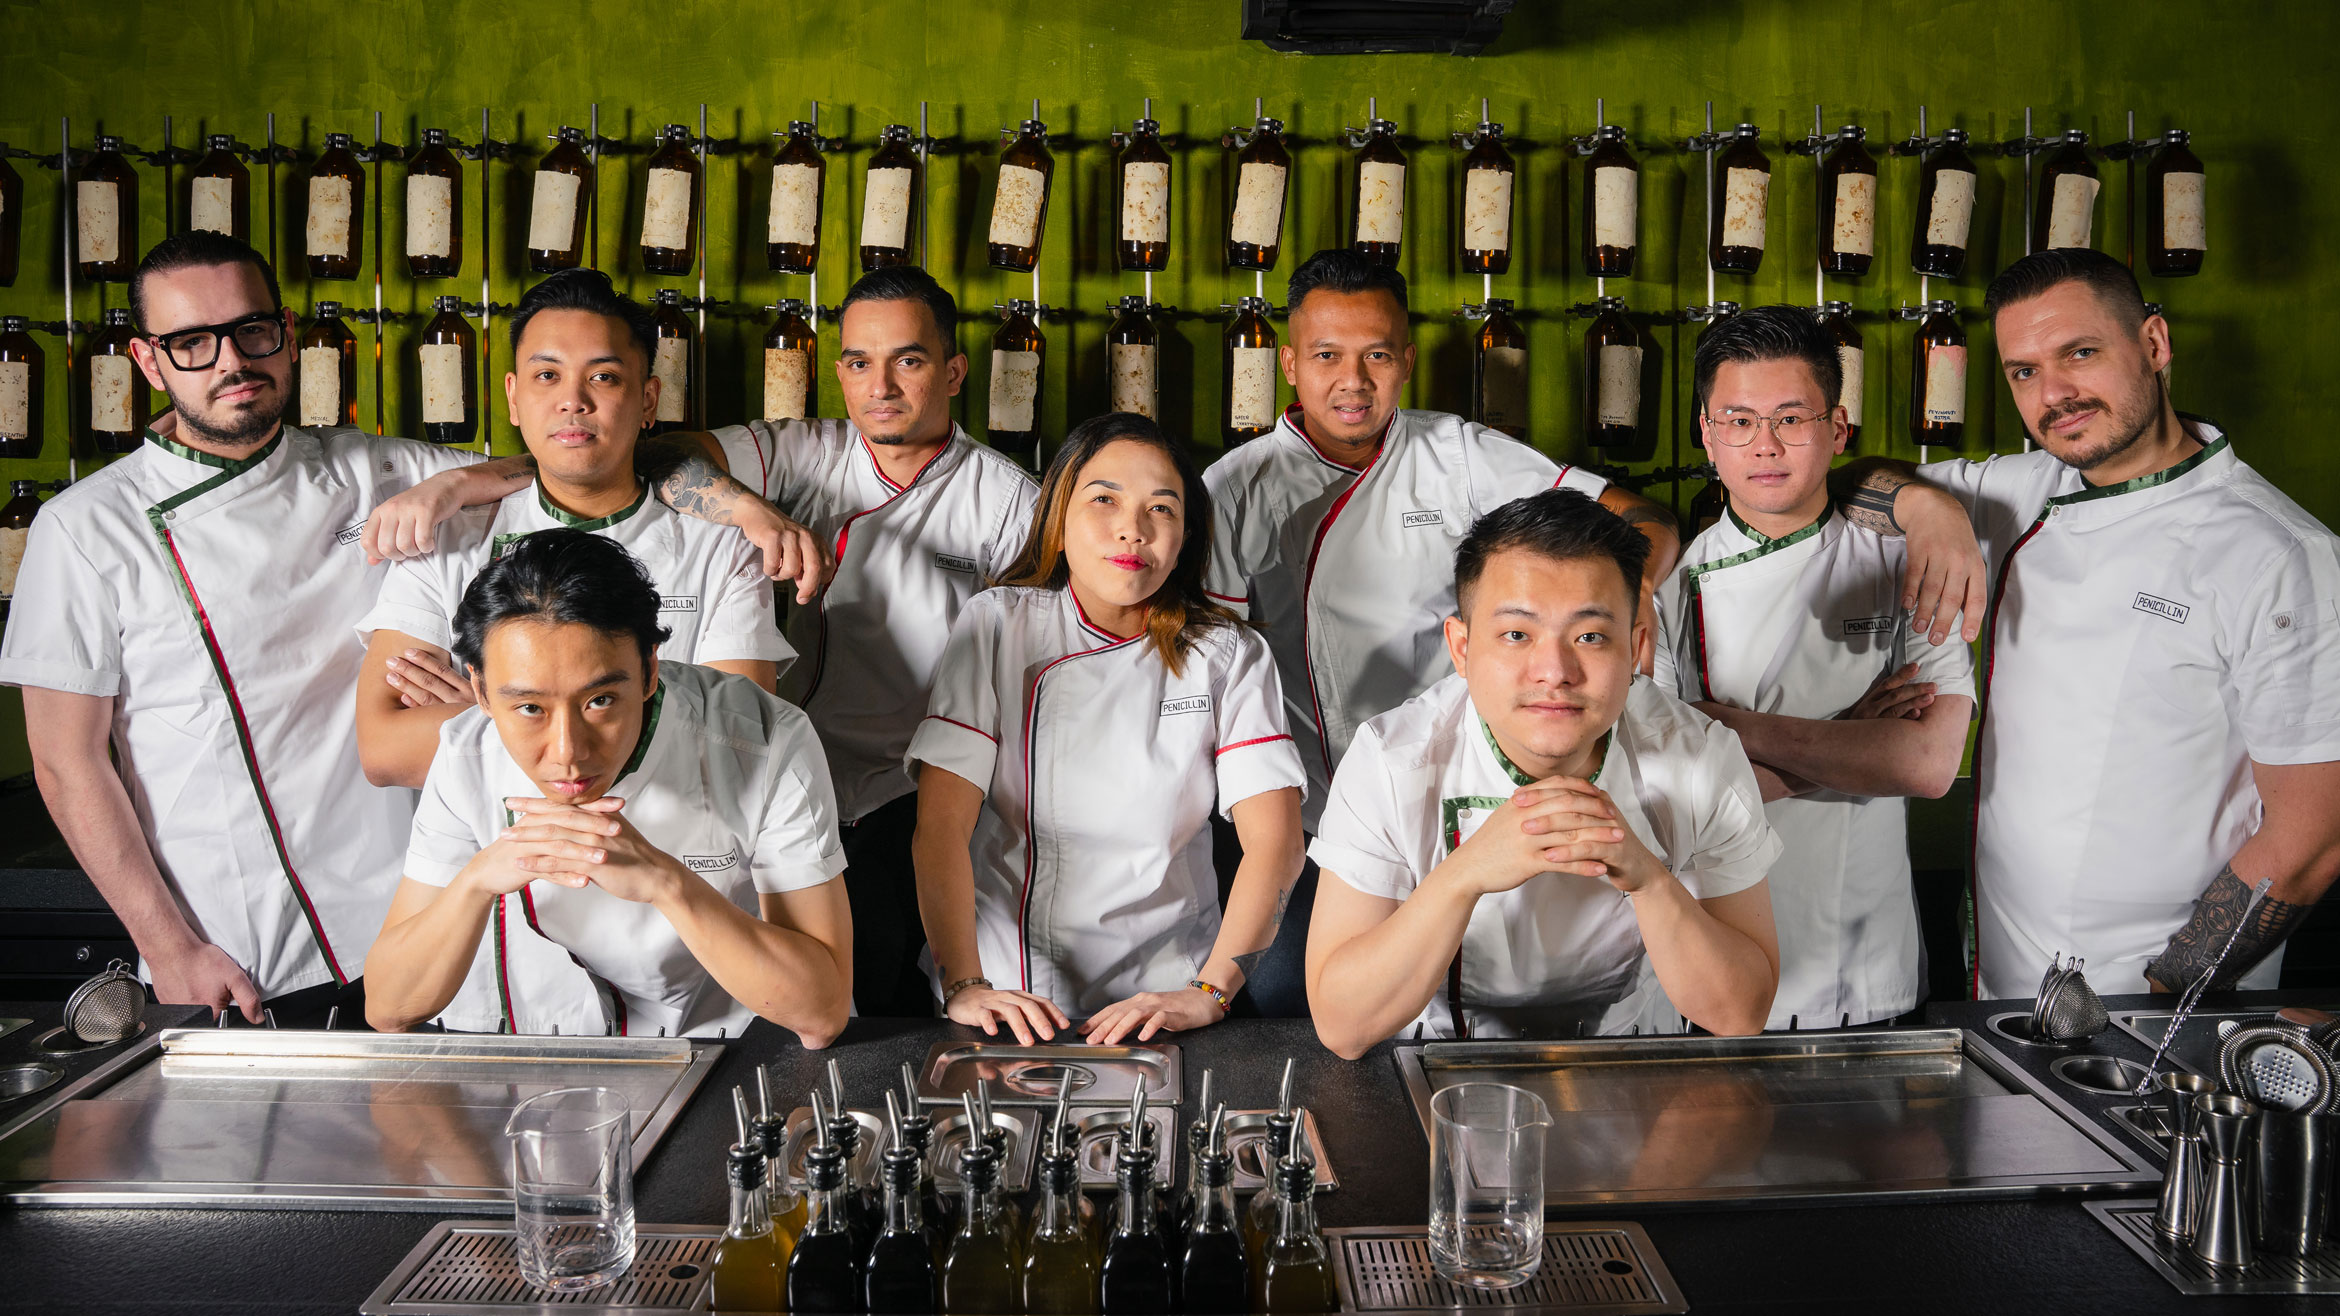 A group of people wearing white jackets poses behind a bar.